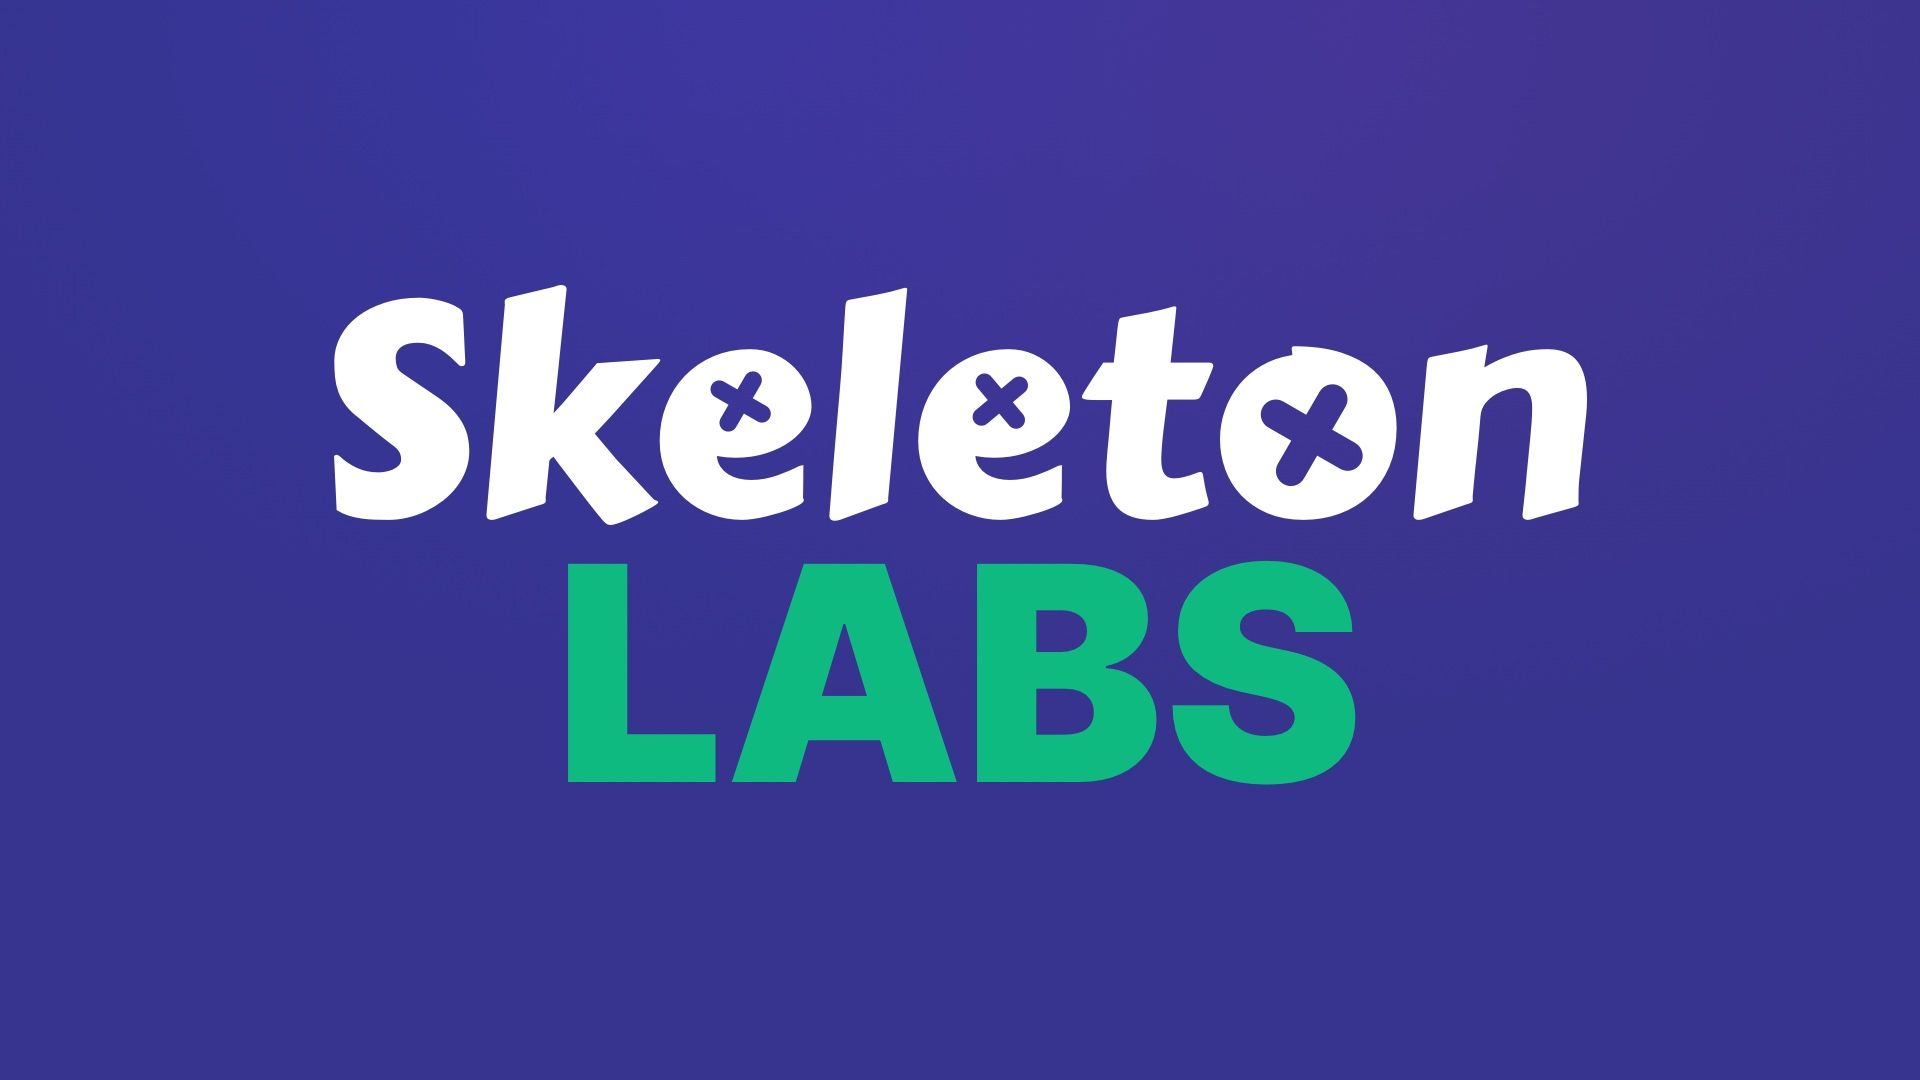 Announcing new services and support from Skeleton Labs